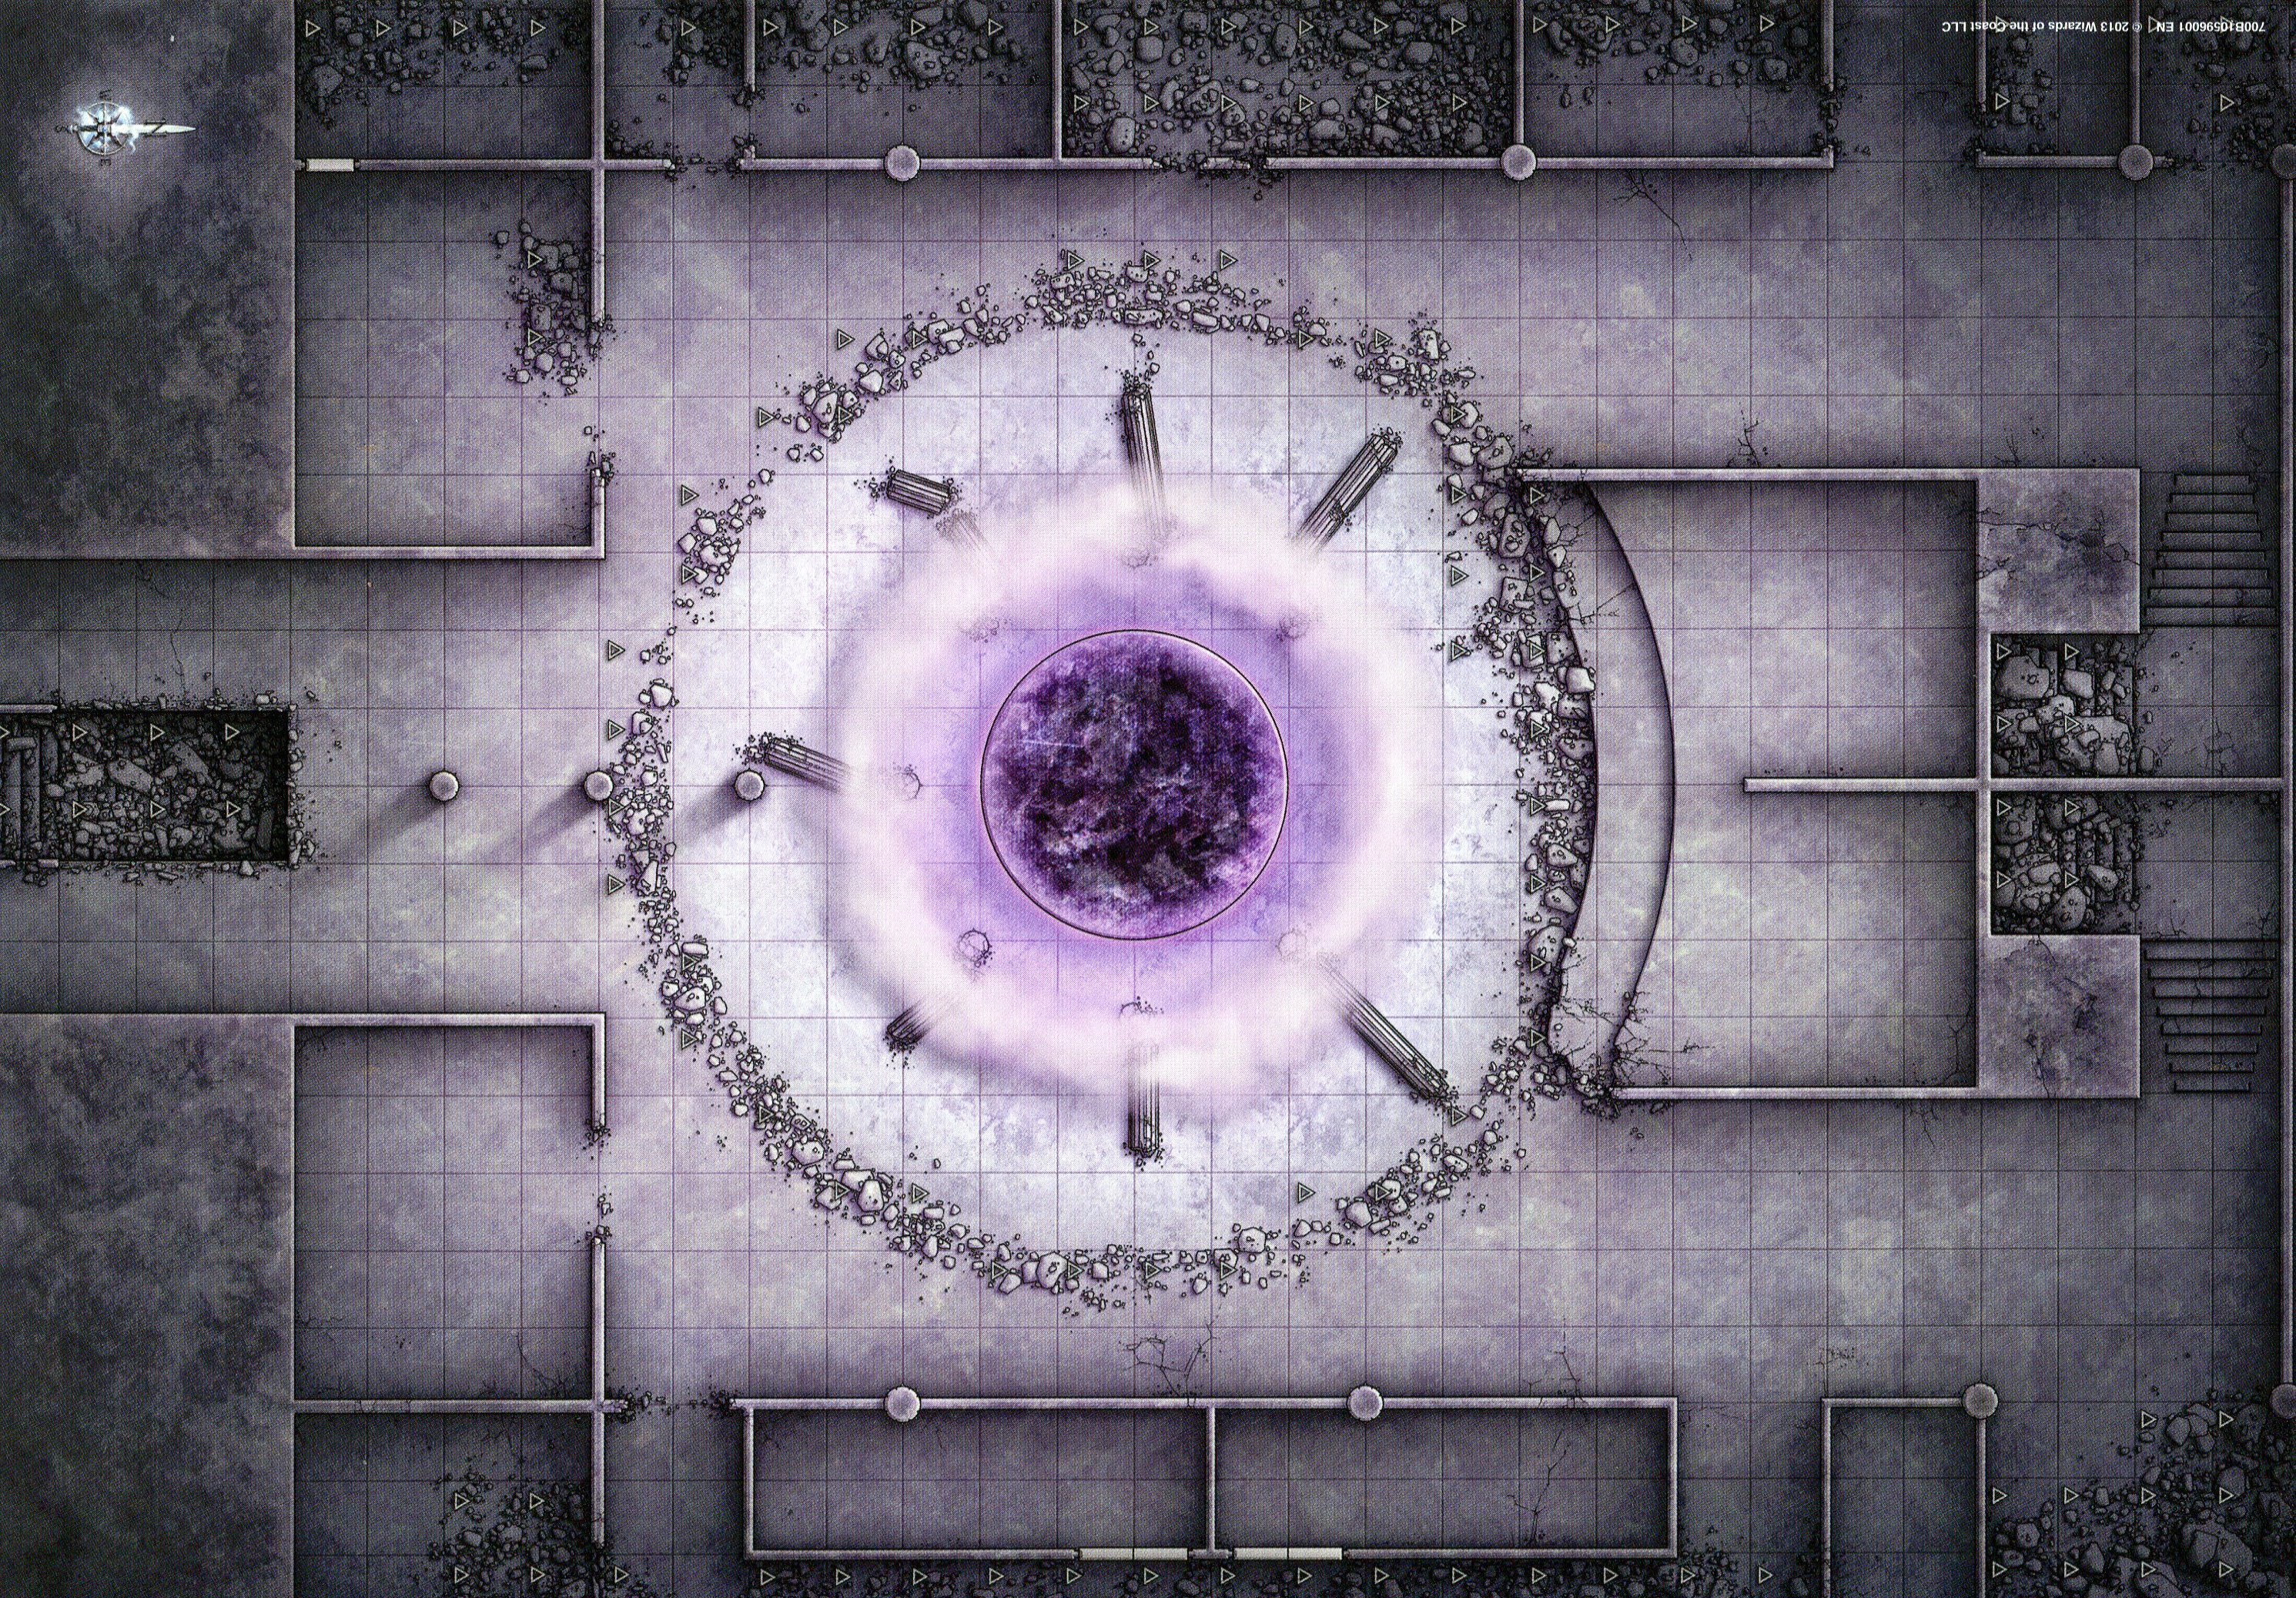 Lair Assault Map Gallery – Dungeon's Master